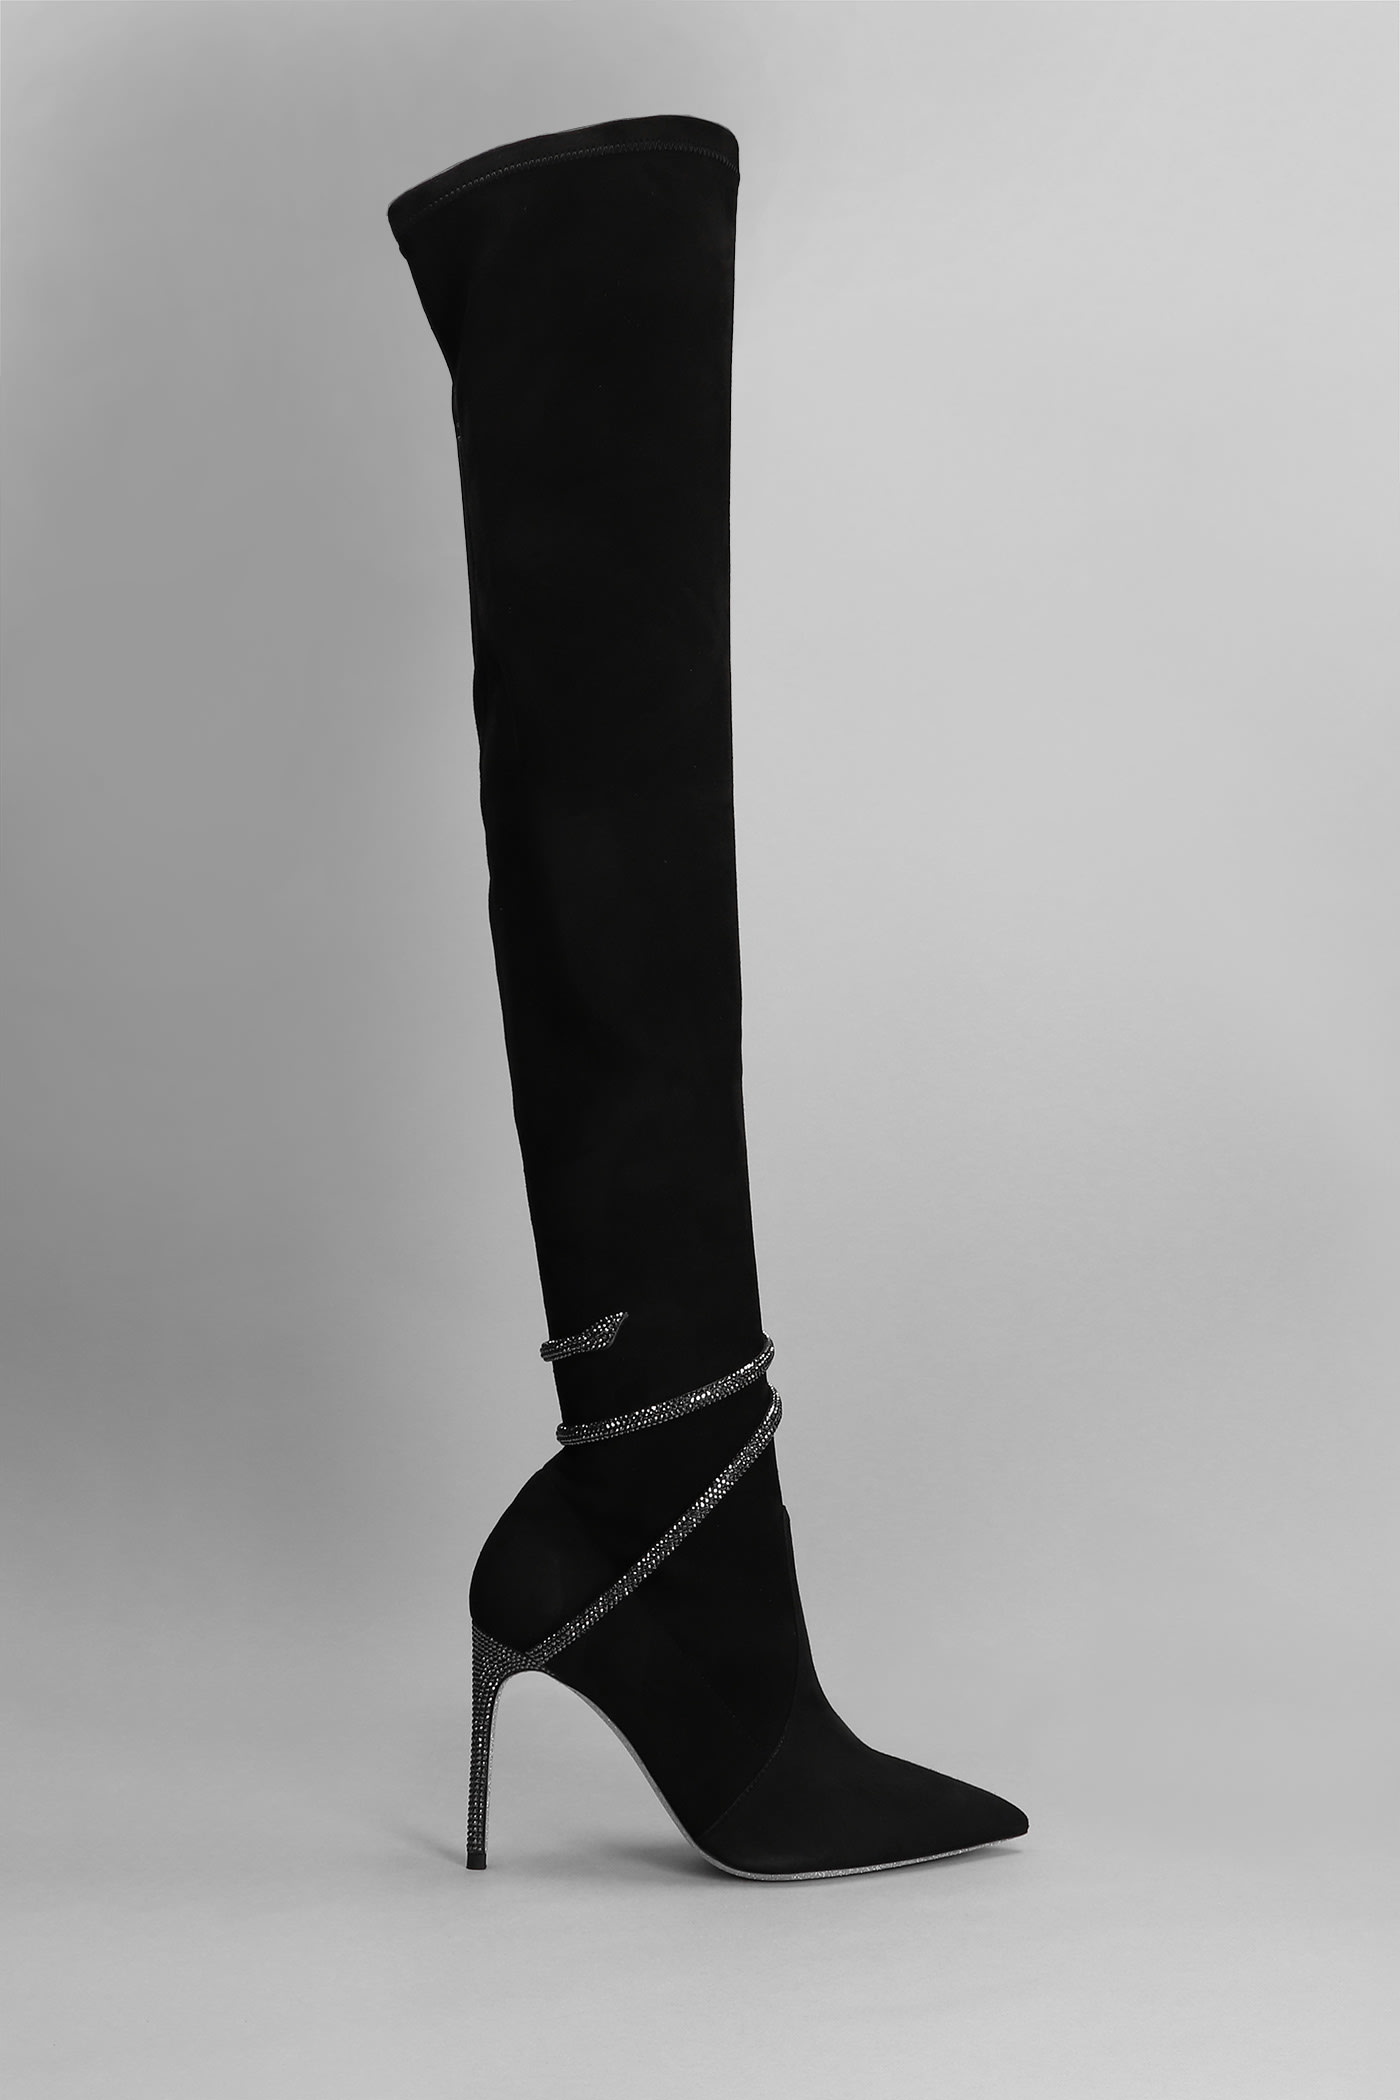 René Caovilla Boots In Black Suede And Leather